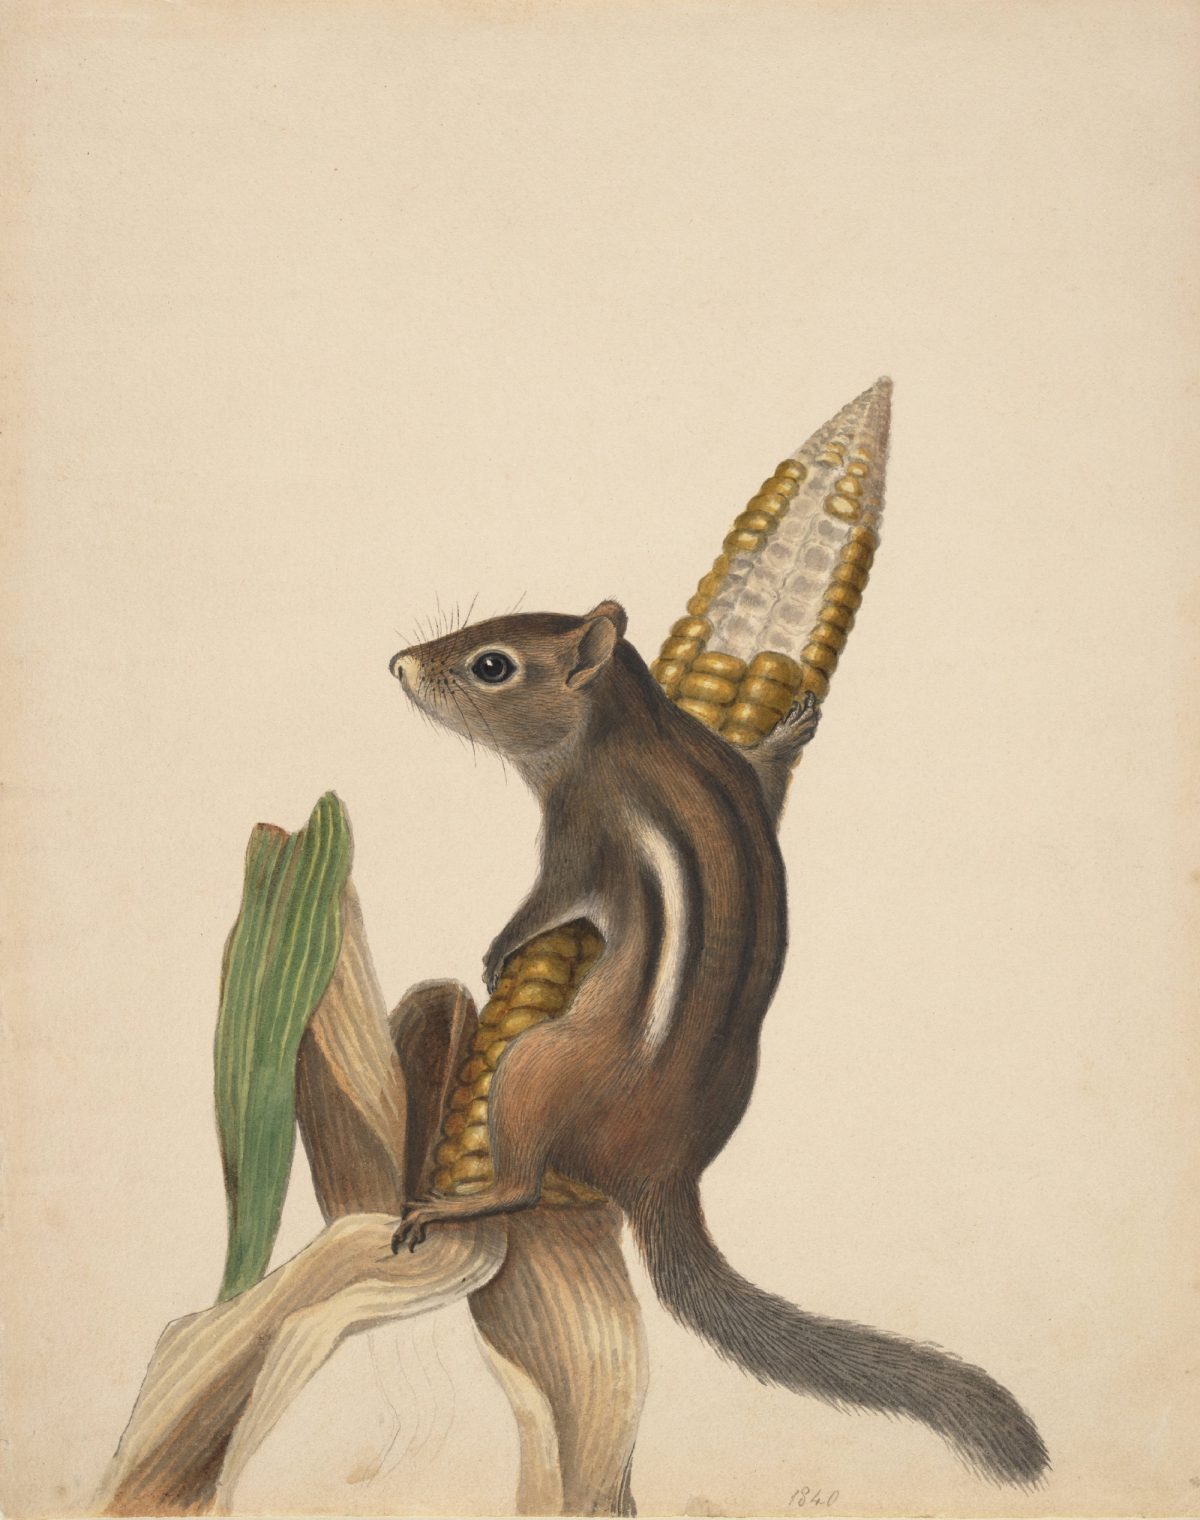 Chipmunk "The chipmunk is perched on an ear of corn. The date is written in graphite below the chipmunk’s tail."